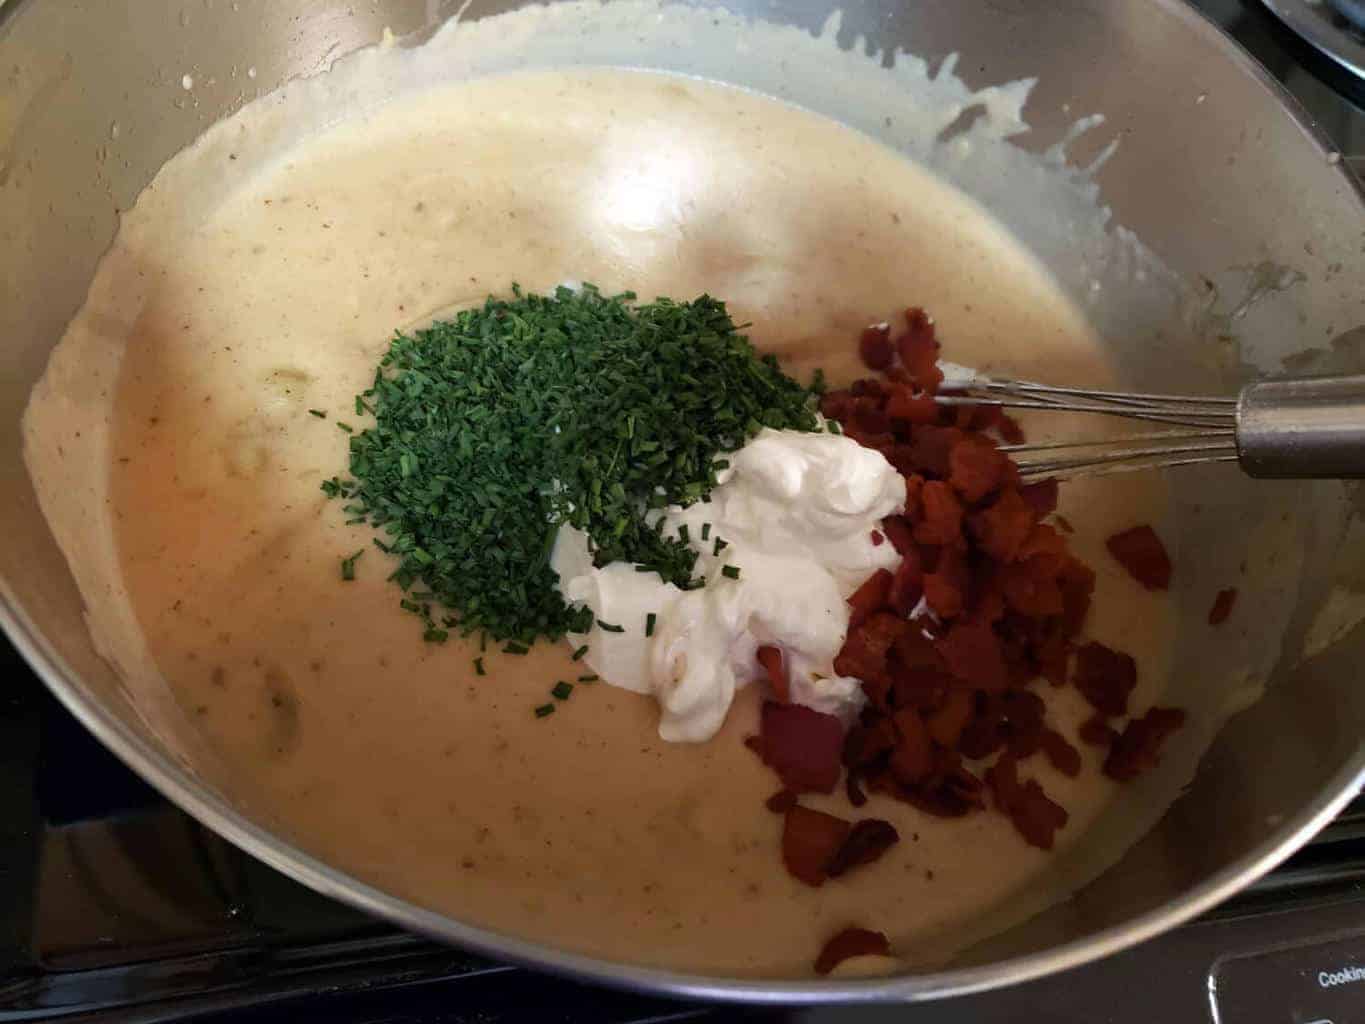 Bacon, sour cream, and chives added to Loaded Potato Soup